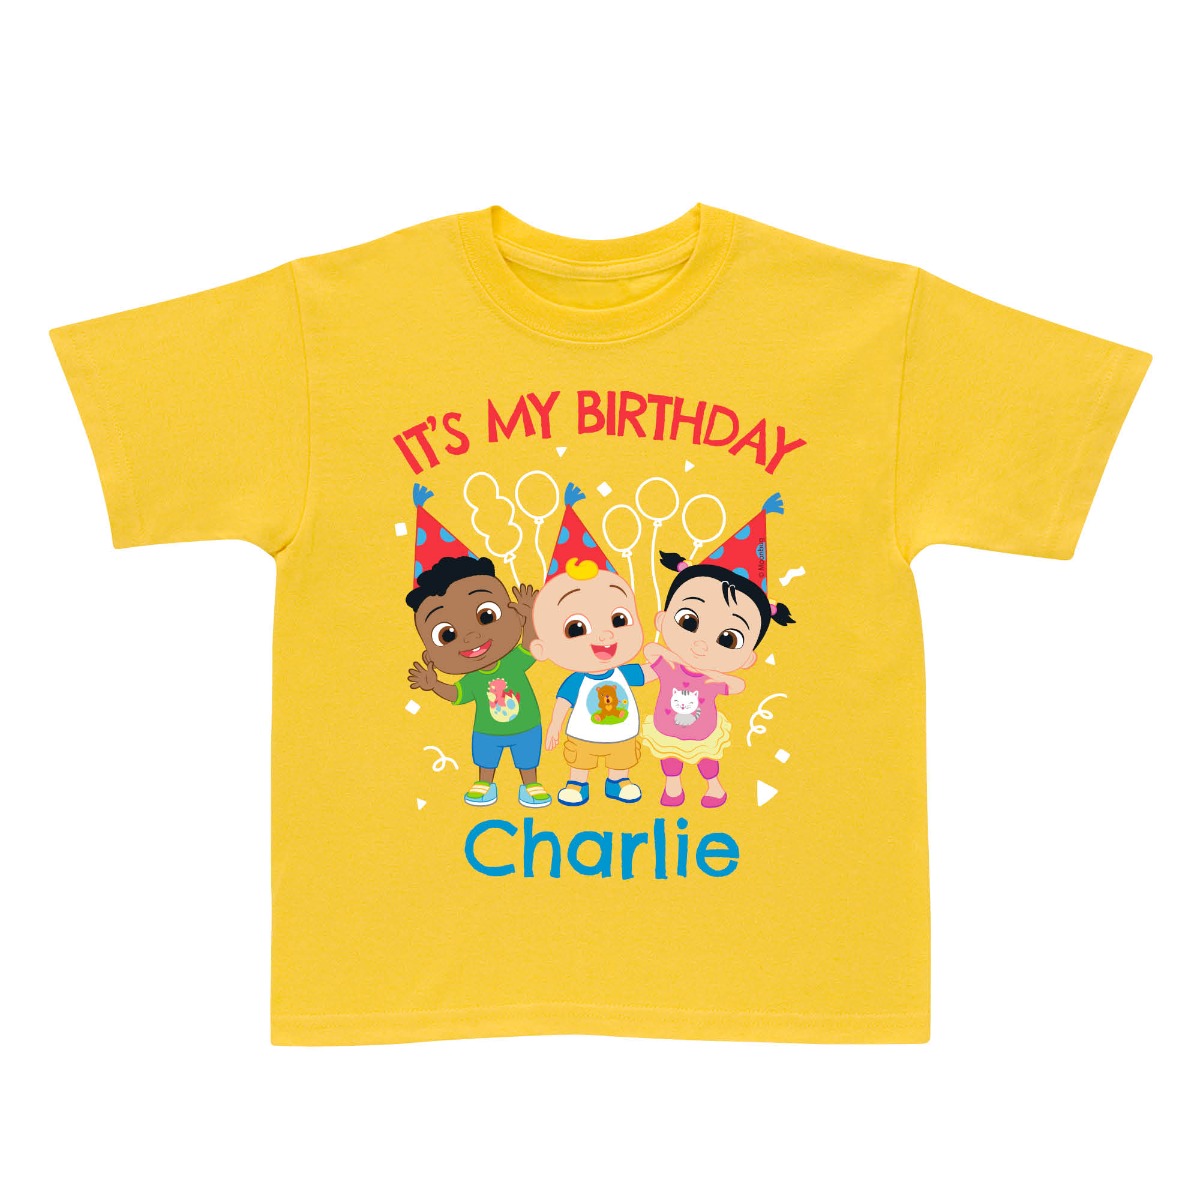 CoComelon and Friends Birthday Yellow T-Shirt